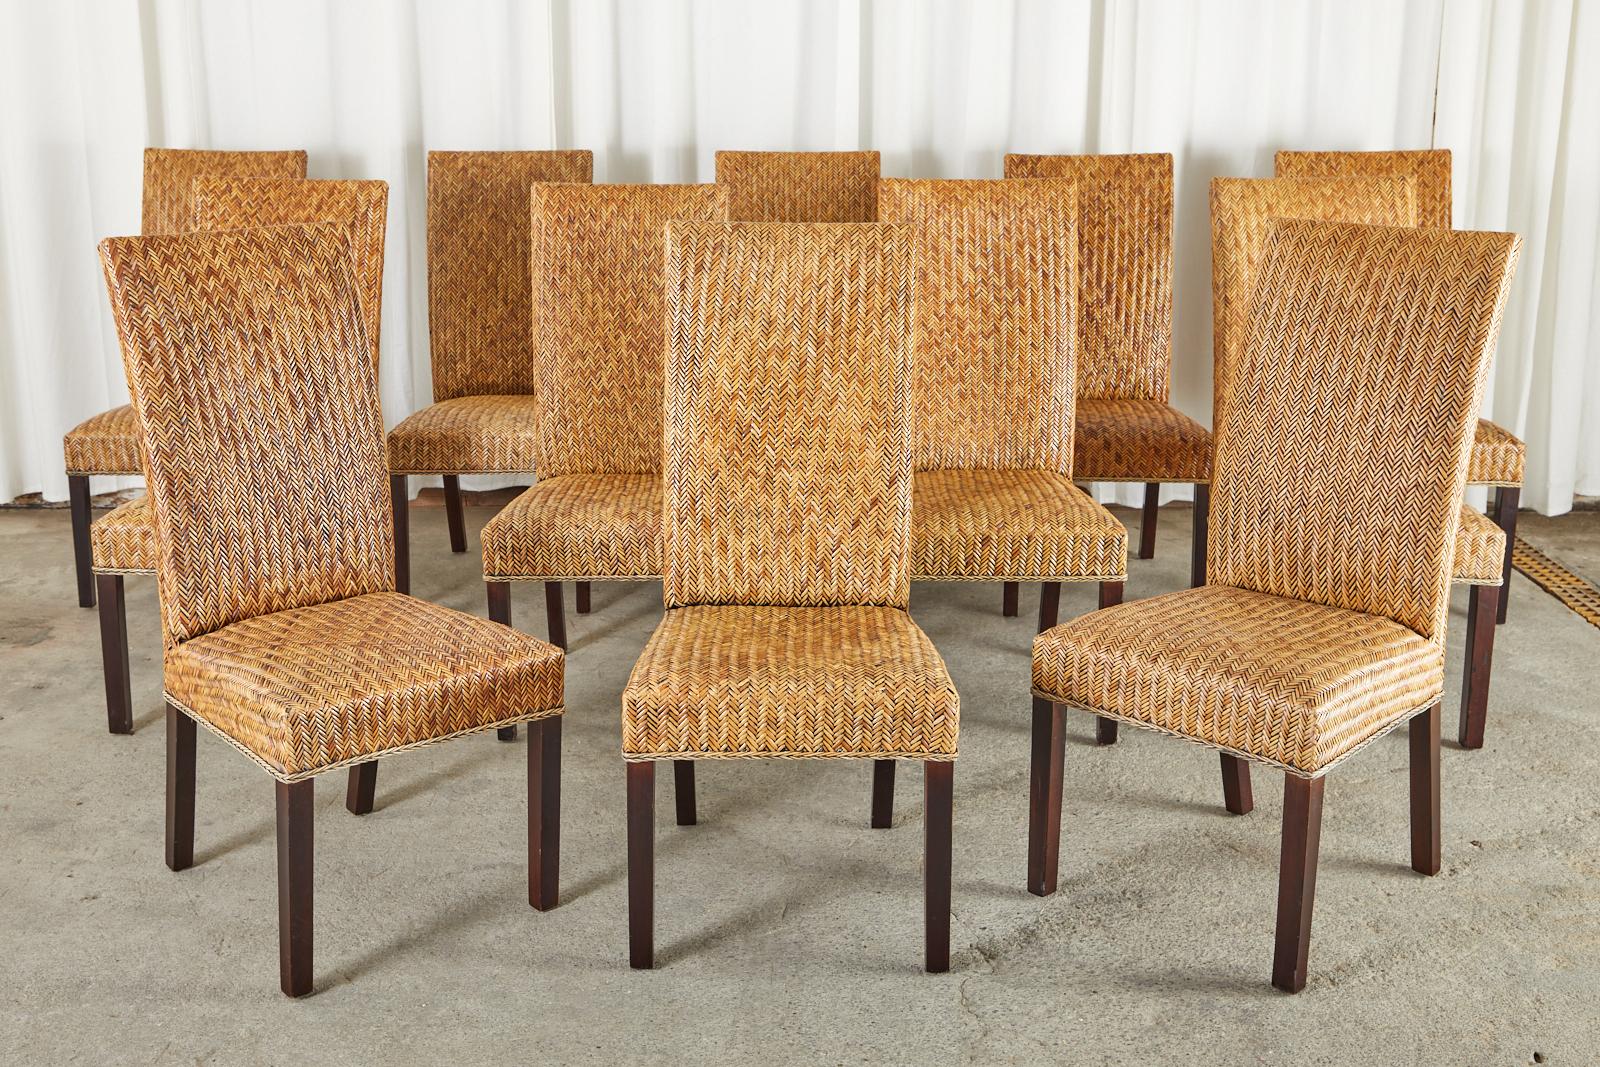 Set of Twenty-Four Organic Modern Woven Rattan Dining Chairs In Distressed Condition In Rio Vista, CA